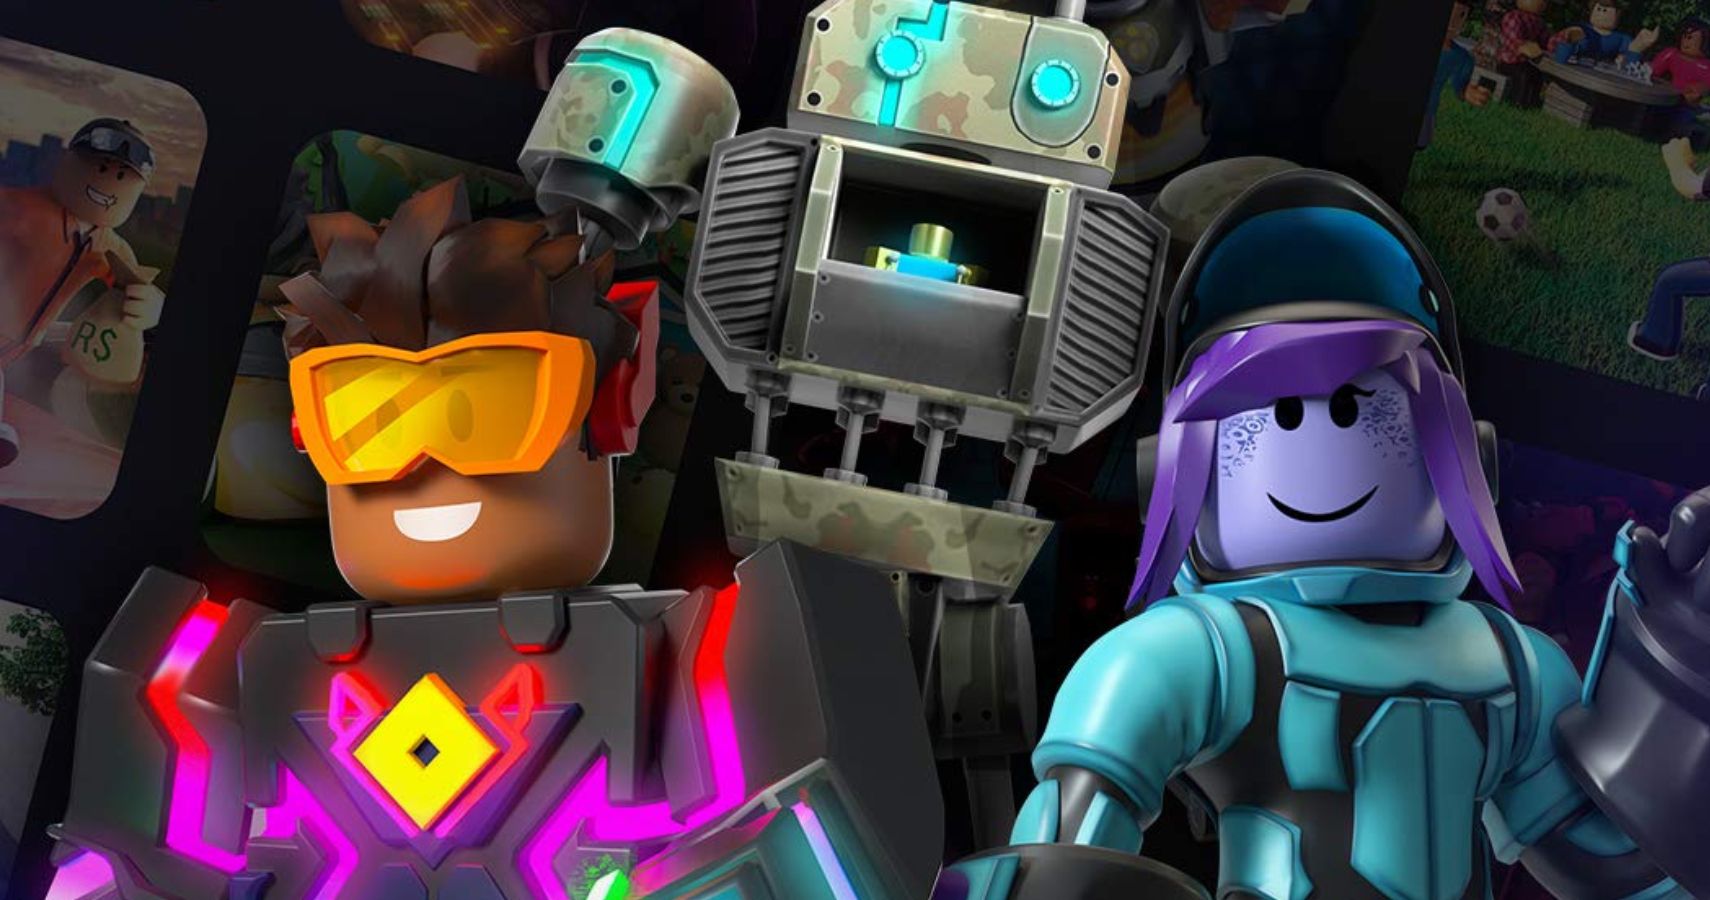 s Prime Gaming Adds Exclusive Roblox Content